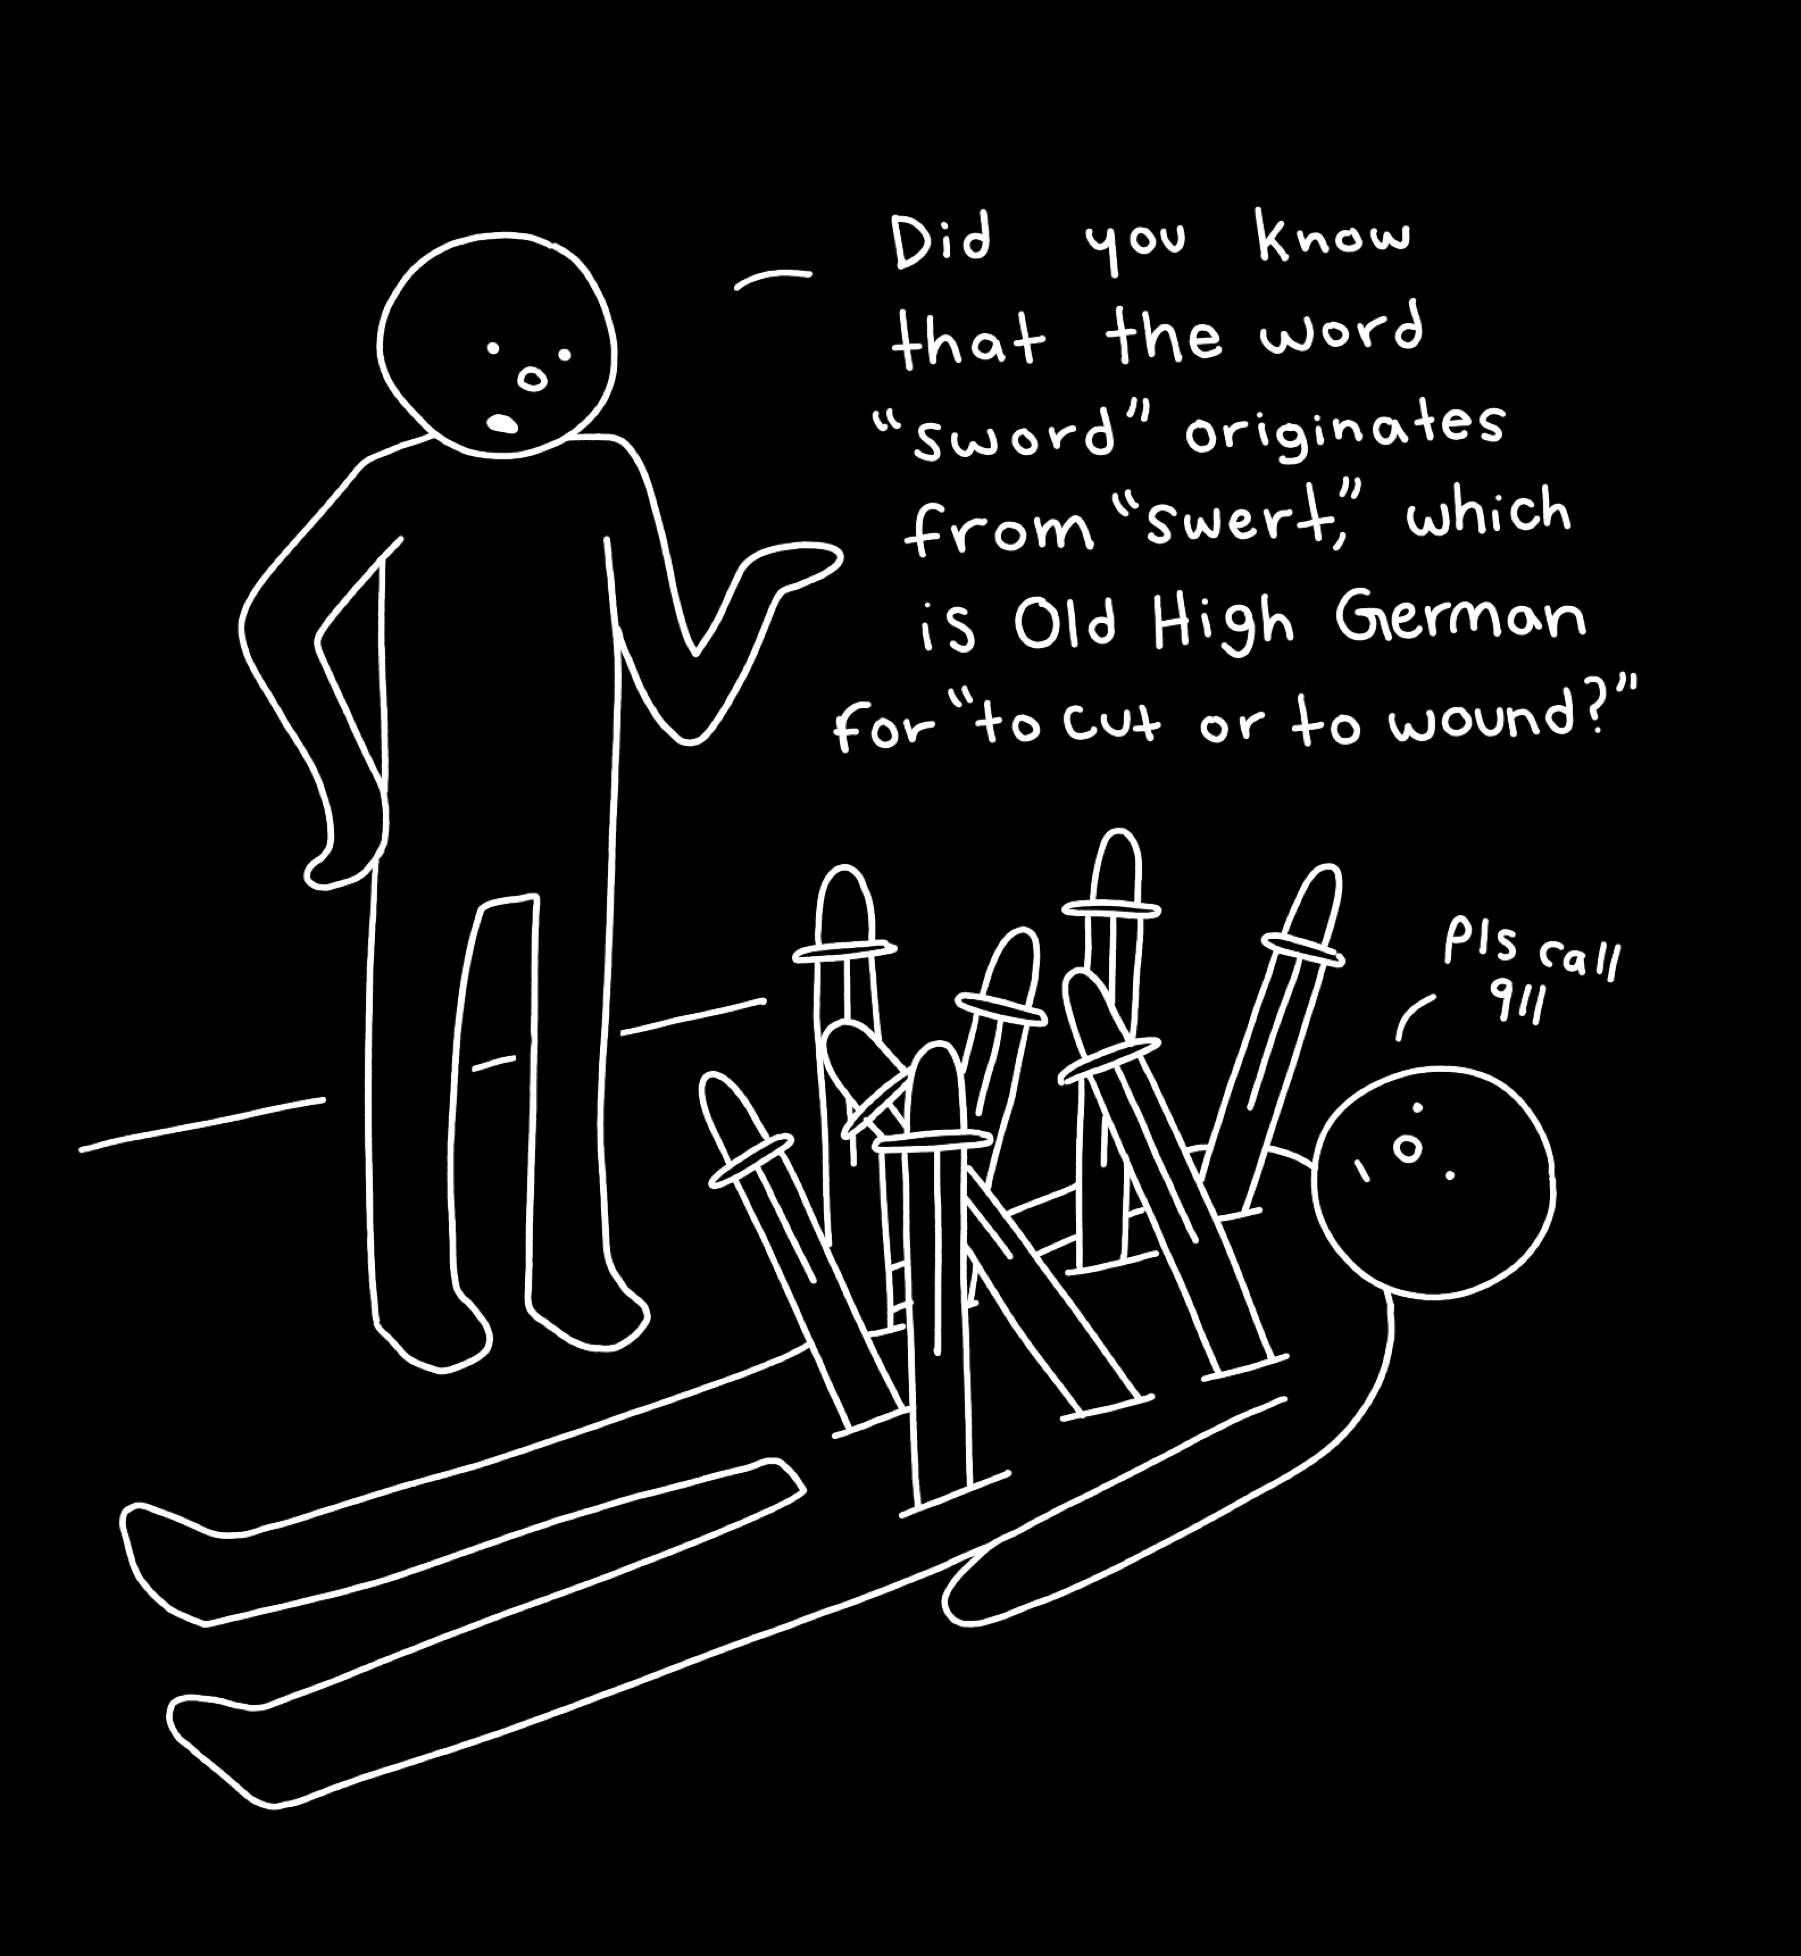 Graphic of a stick figure saying "Did you know that the word 'sword' originates from 'swert,' which is Old High German for 'to cut or to wound'?" while another stick figure has 8 swords sticking out of them and saying "please call 911."